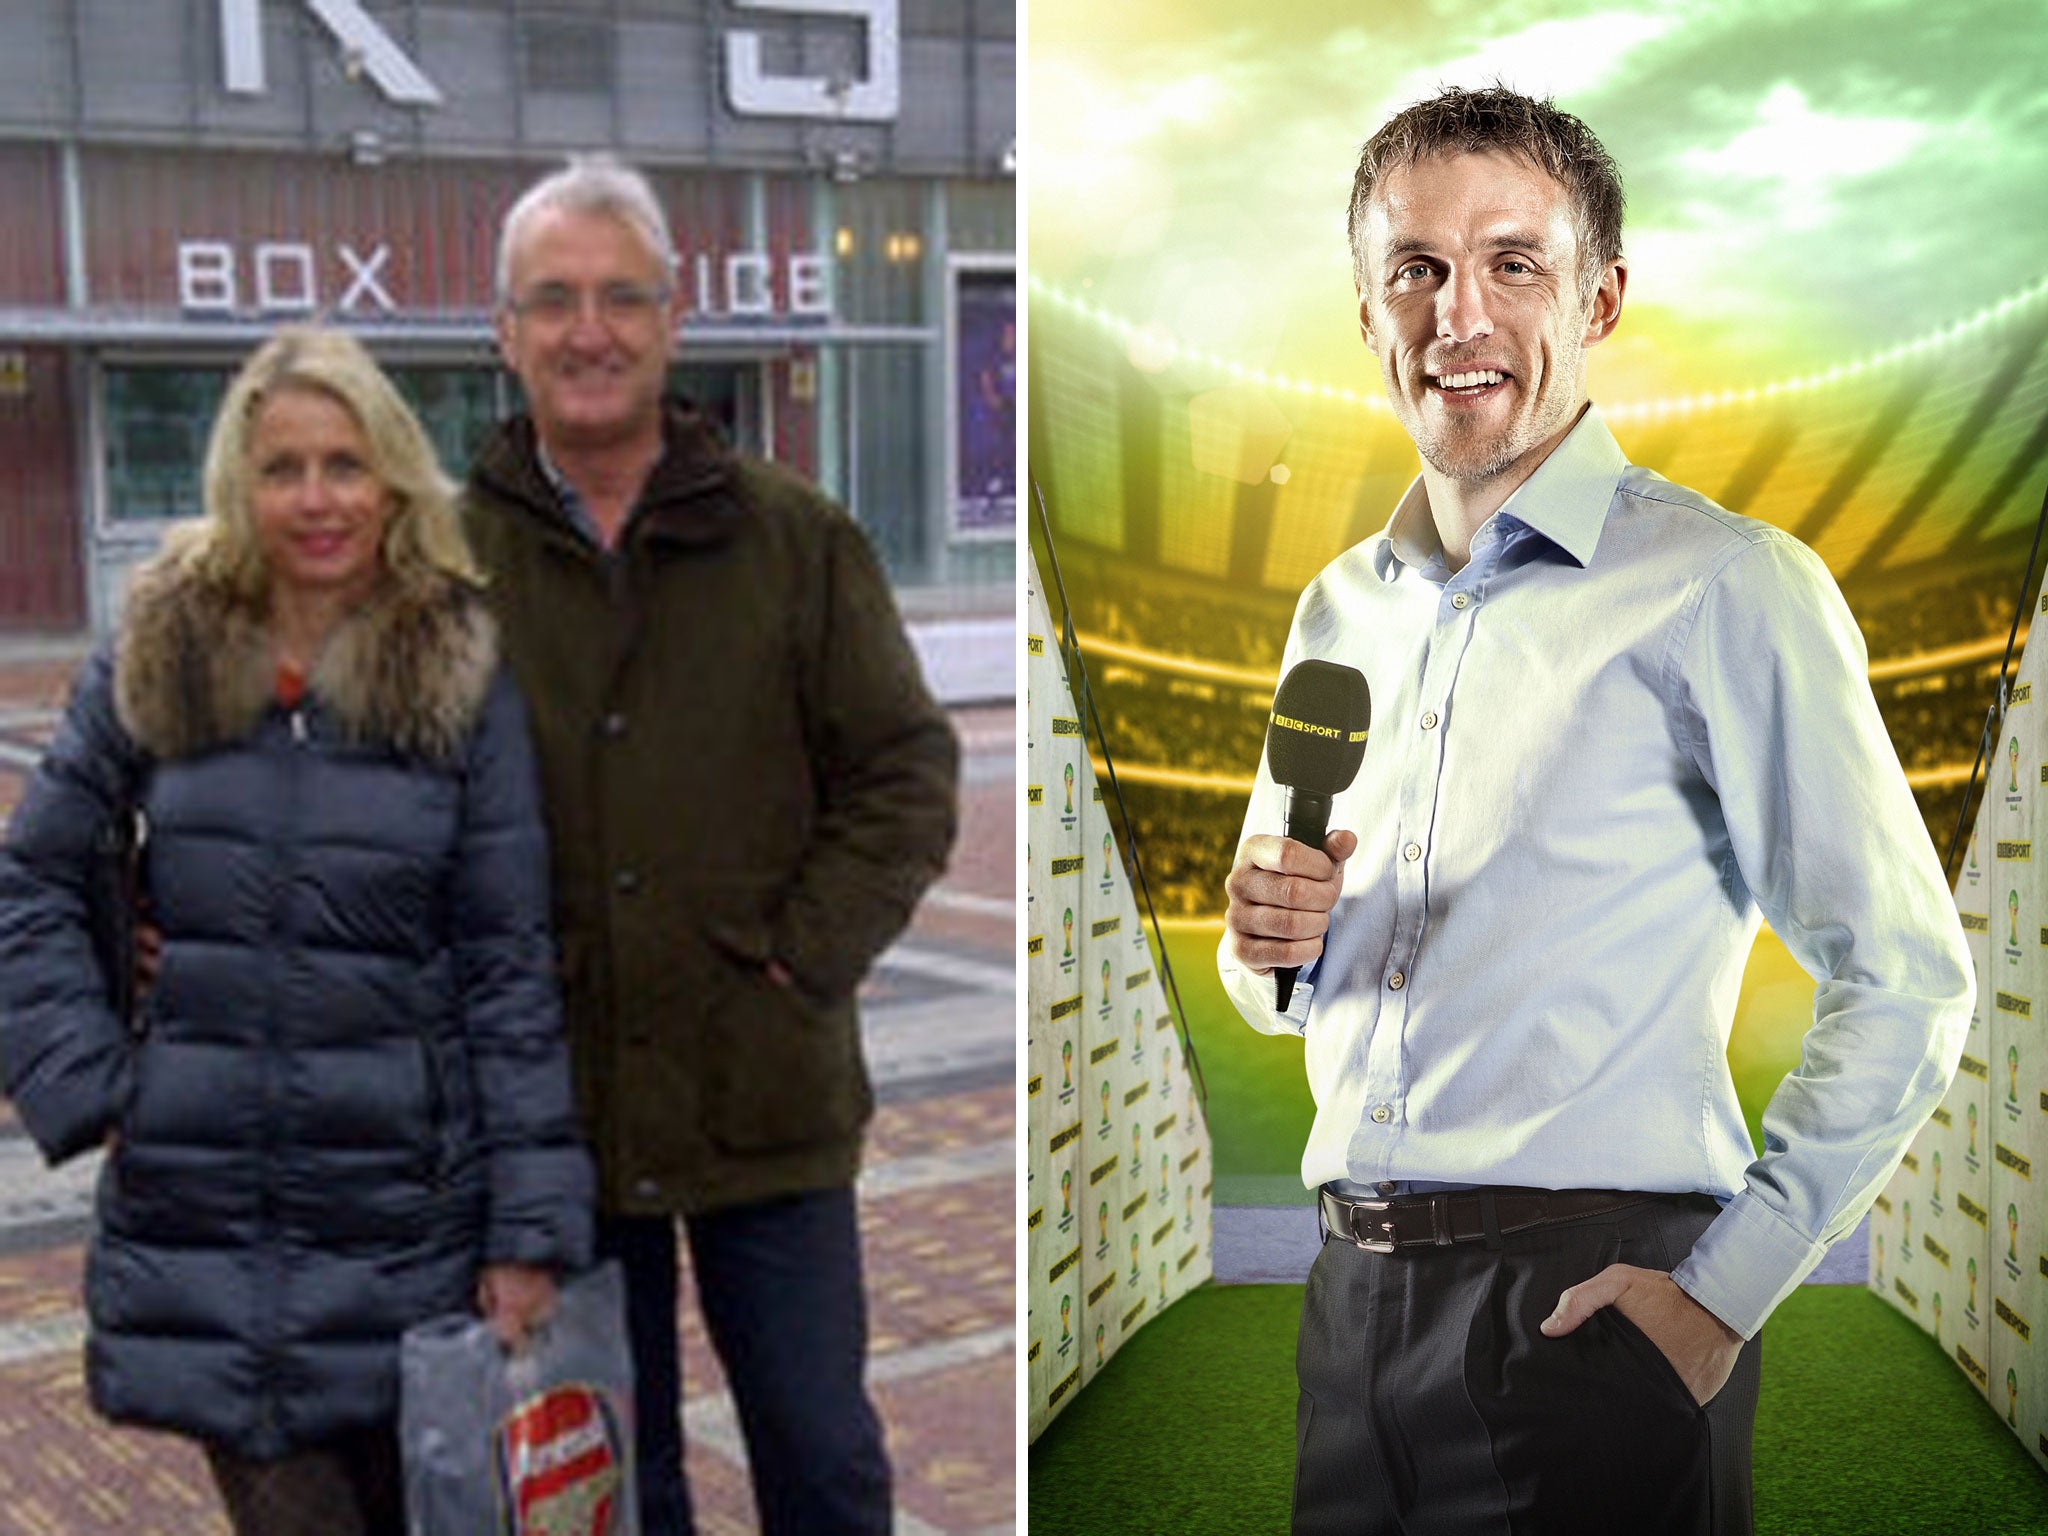 Phil Neville, the 60-year-old radiator salesman (left) and Phil Neville, the former England footballer (right)